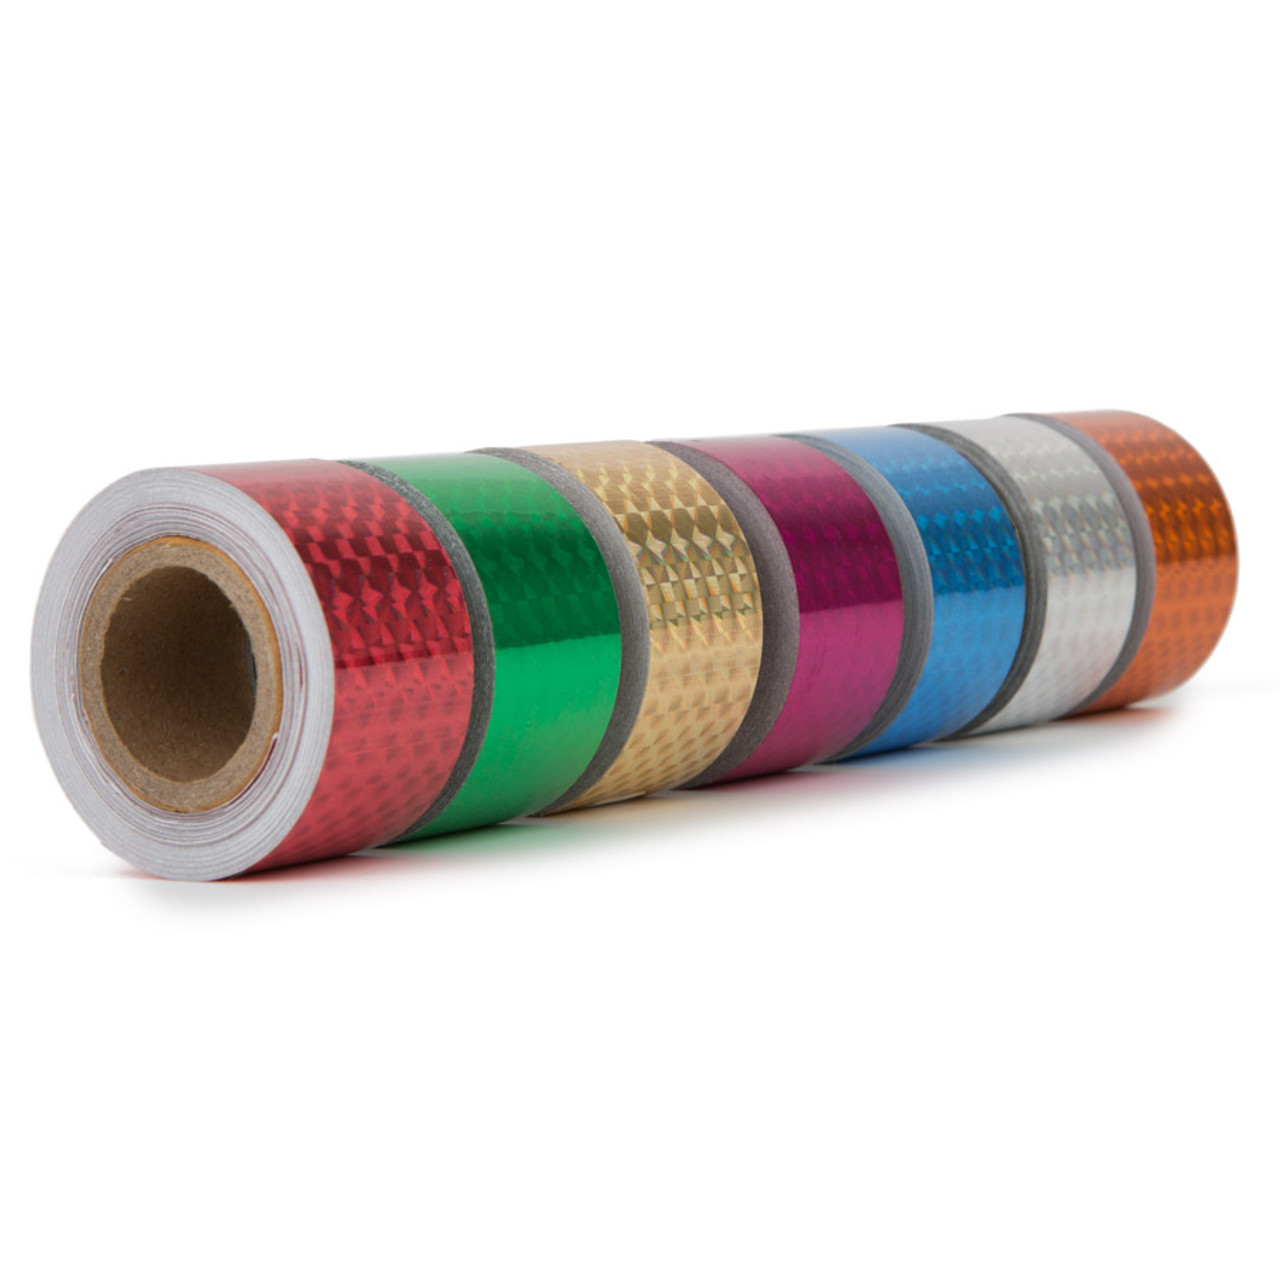 HoloCrystal Tape, choose your color and size, 50 foot rolls of Holographic  Tape